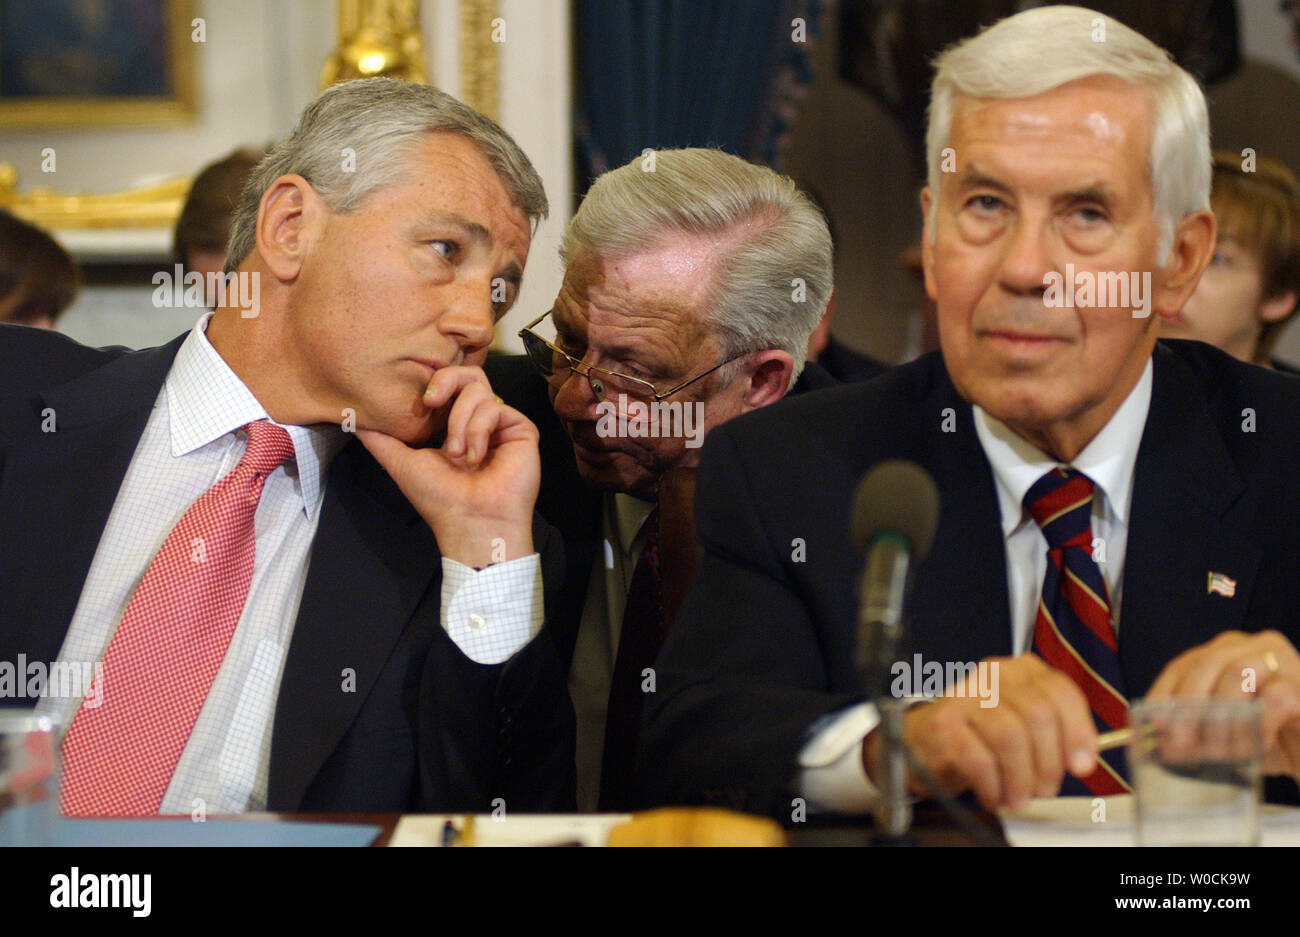 Sen. Chuck Hagel, R-Neb., left, speaks with an aid as Sen. Richard Lugar, R-IN, chairs the Senate Foreign Relations Committee meeting which was held to vote on John Bolton to be U.S. Ambassador to the United Nations on Capitol Hill in Washington on April 19, 2005. The committee chose to delay the vote after Sens. Chuck Hagel, R-Neb. and George Voinovich, R-Ohio, expressed concern allegations against him.   (UPI Photo/Roger L. Wollenberg) Stock Photo